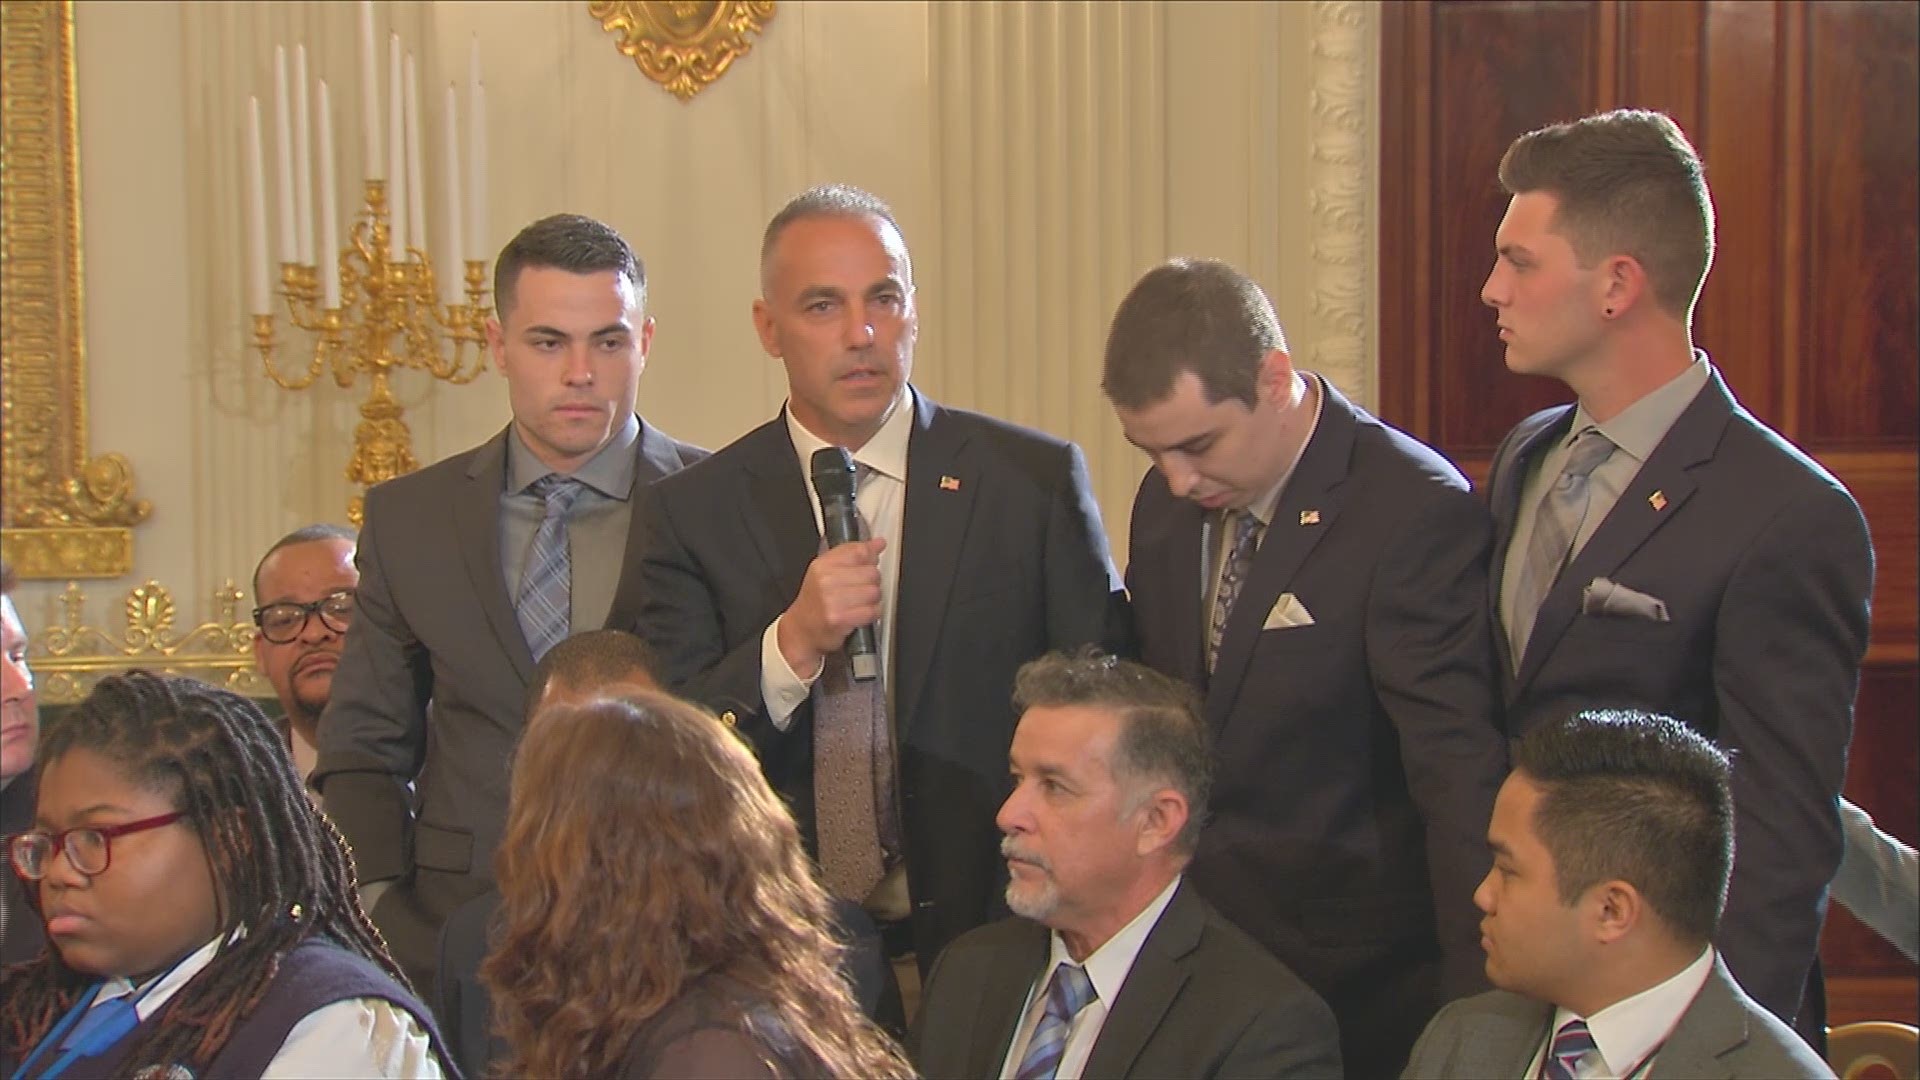 The father of Meadow Pollock, a student who was killed in the Parkland school shooting, speaks at a listening session with President Trump on Wednesday.